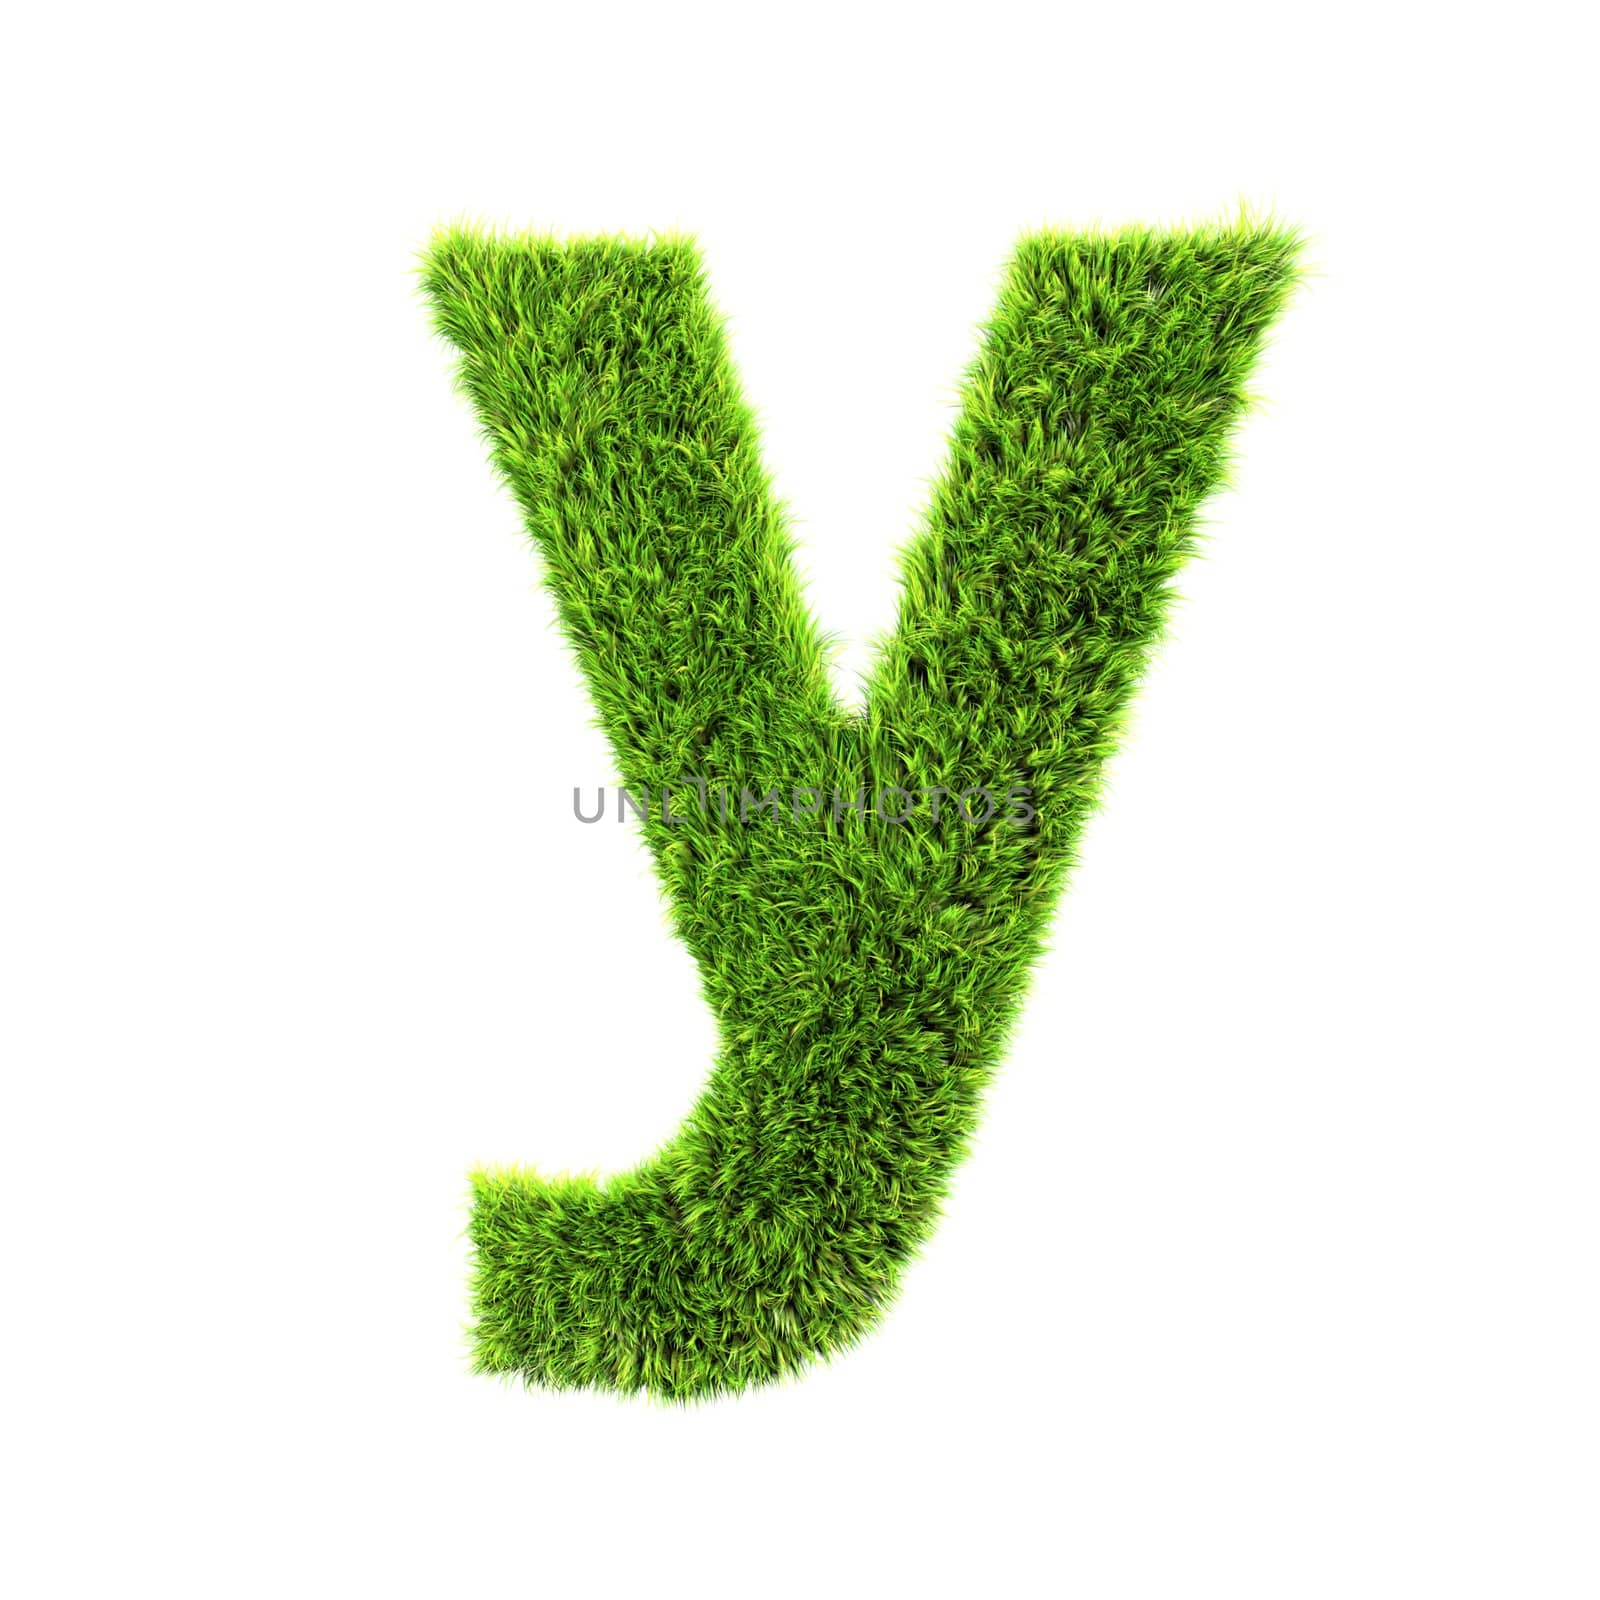 3d grass letter isolated on white background - y